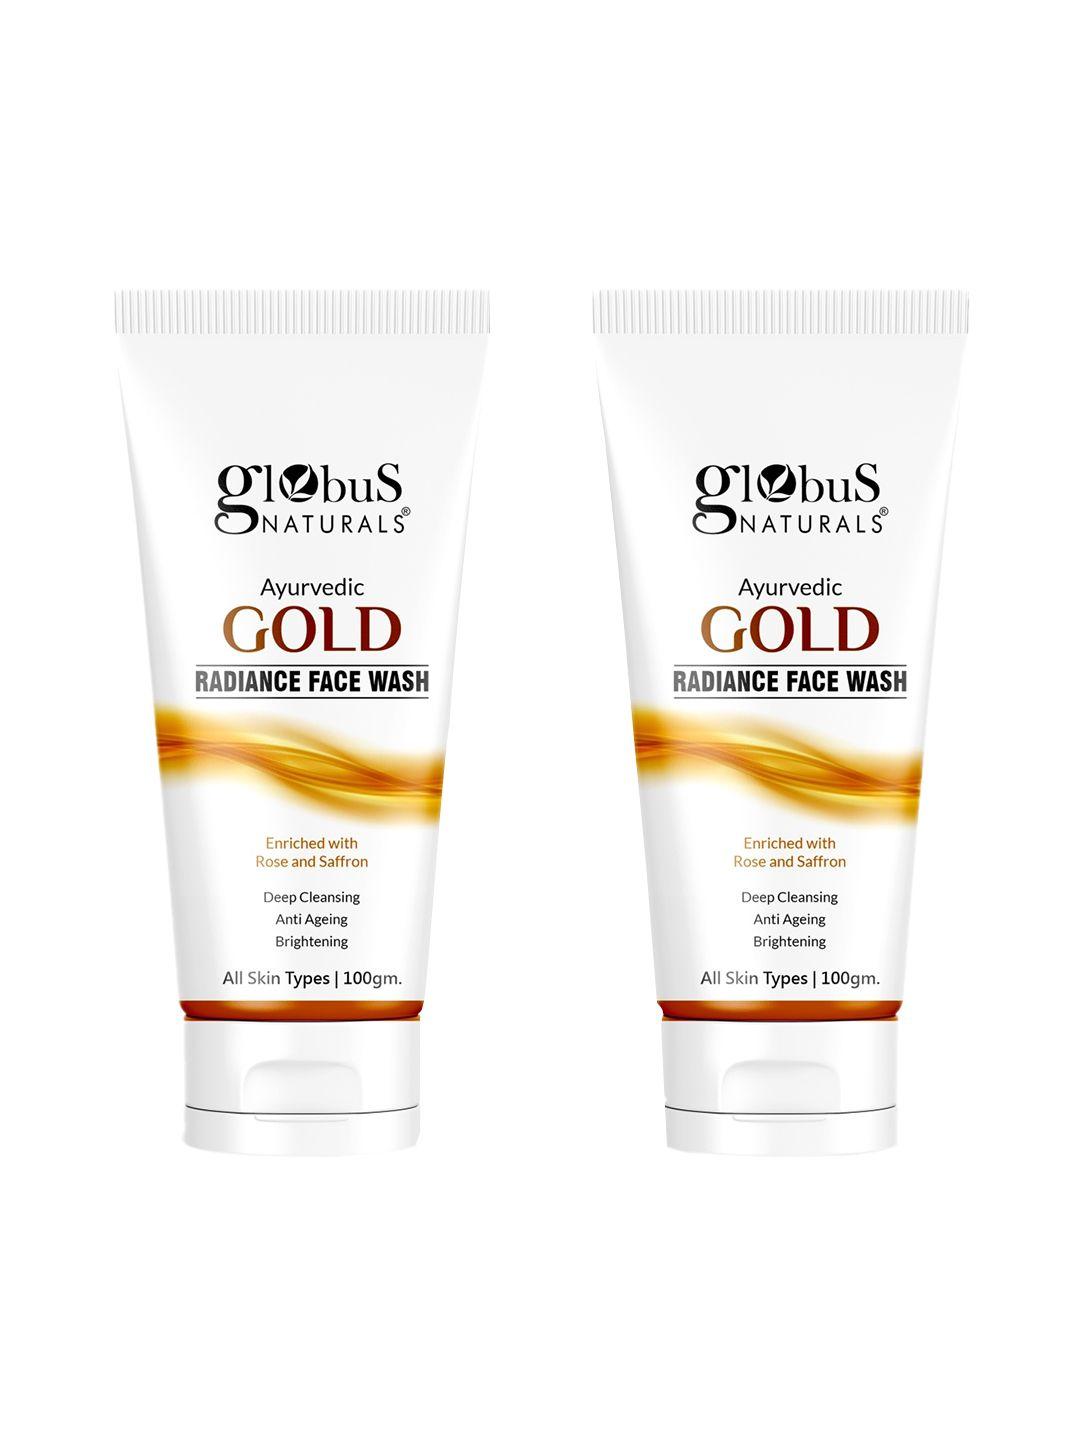 globus naturals set of 2 gold radiance anti-ageing & brightening face wash - 100g each